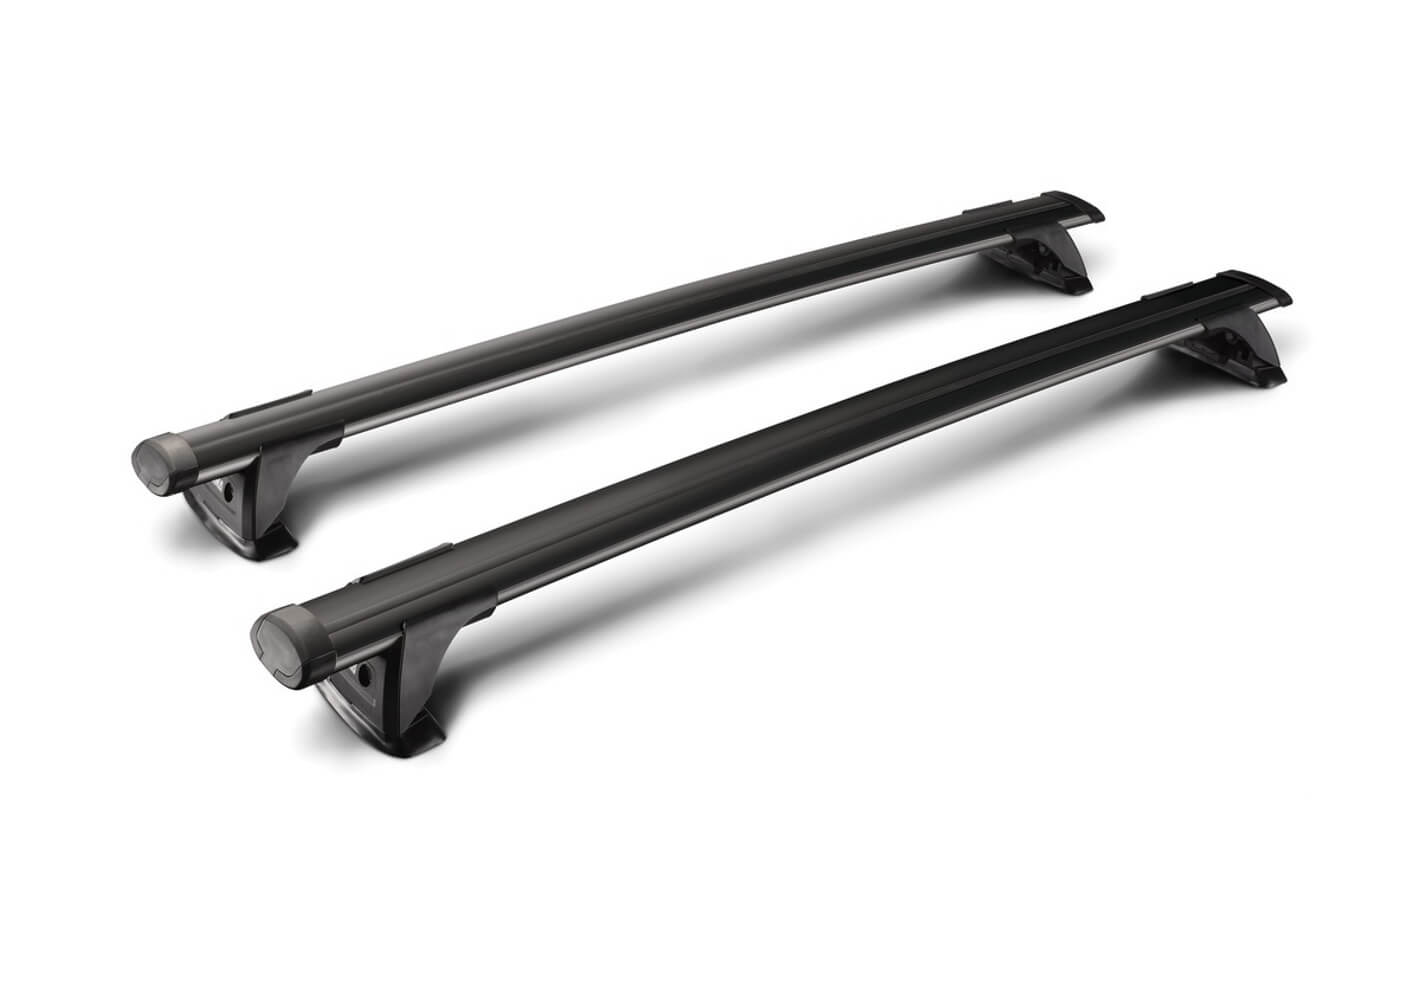 Mazda 626 four door saloon (1992 to 1998):Yakima roof bars package - S15B black bars with K074 kit